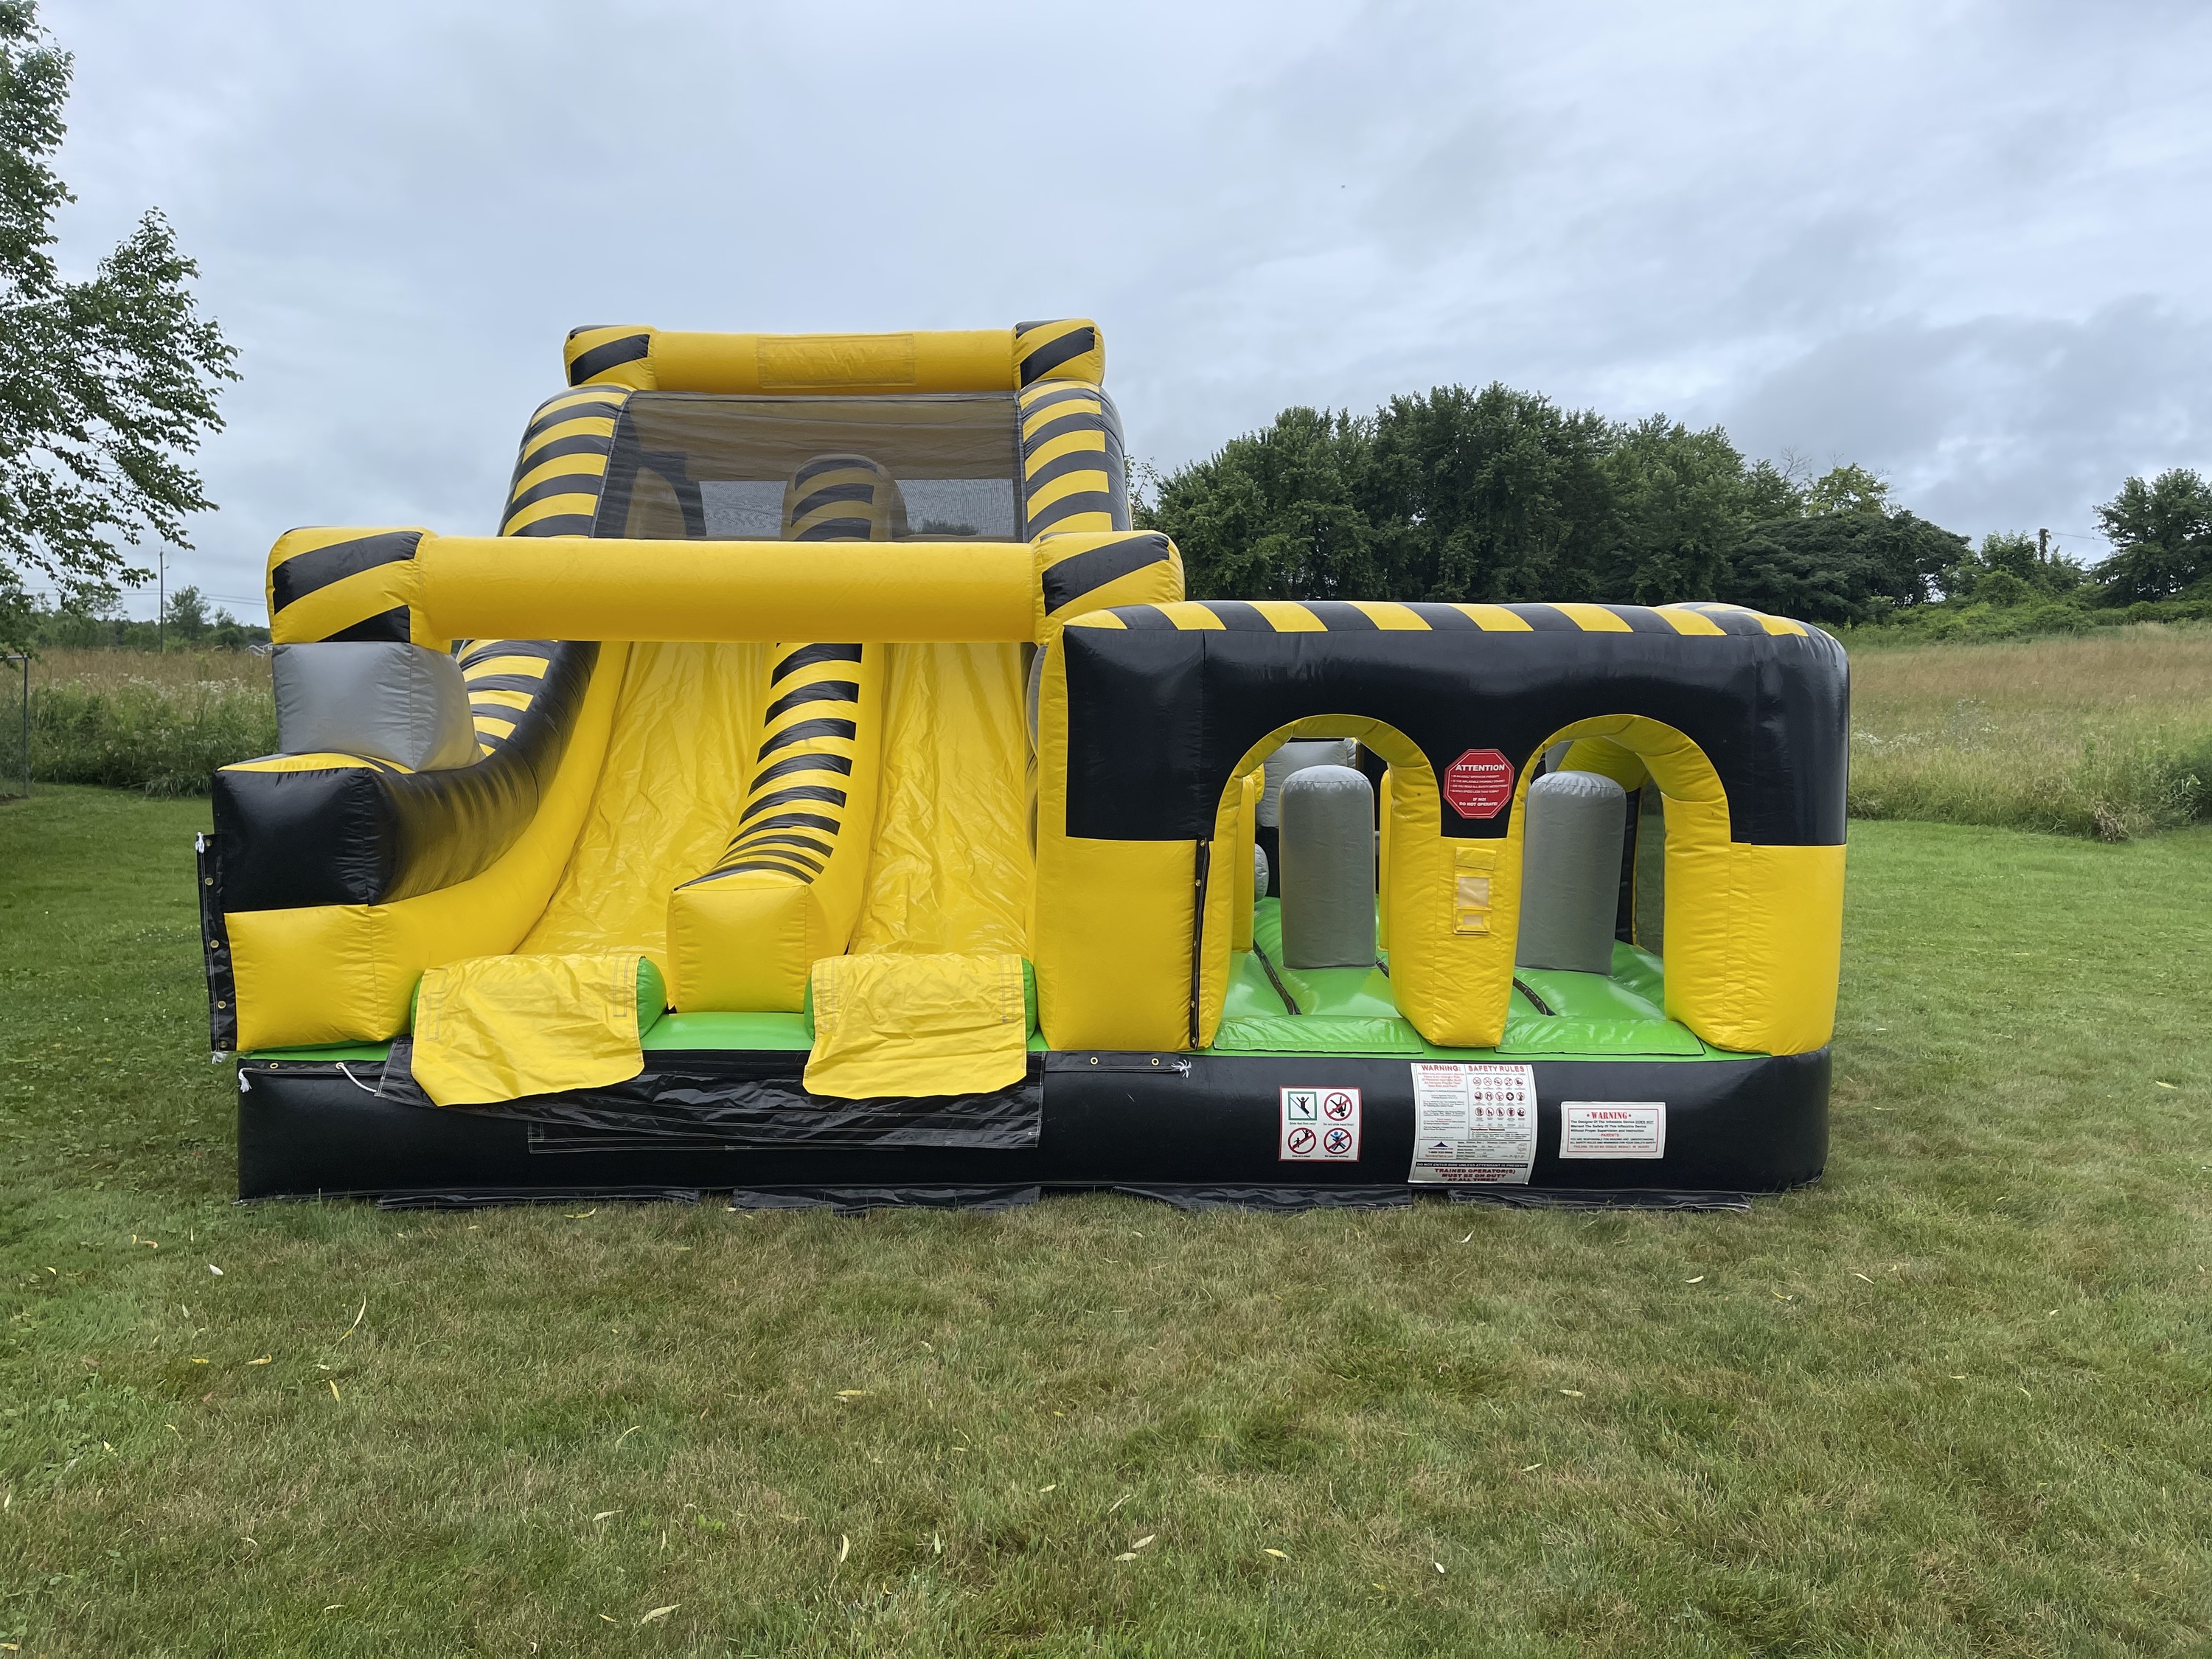 Medium Sized Obstacle Course Rental For After Prom Party